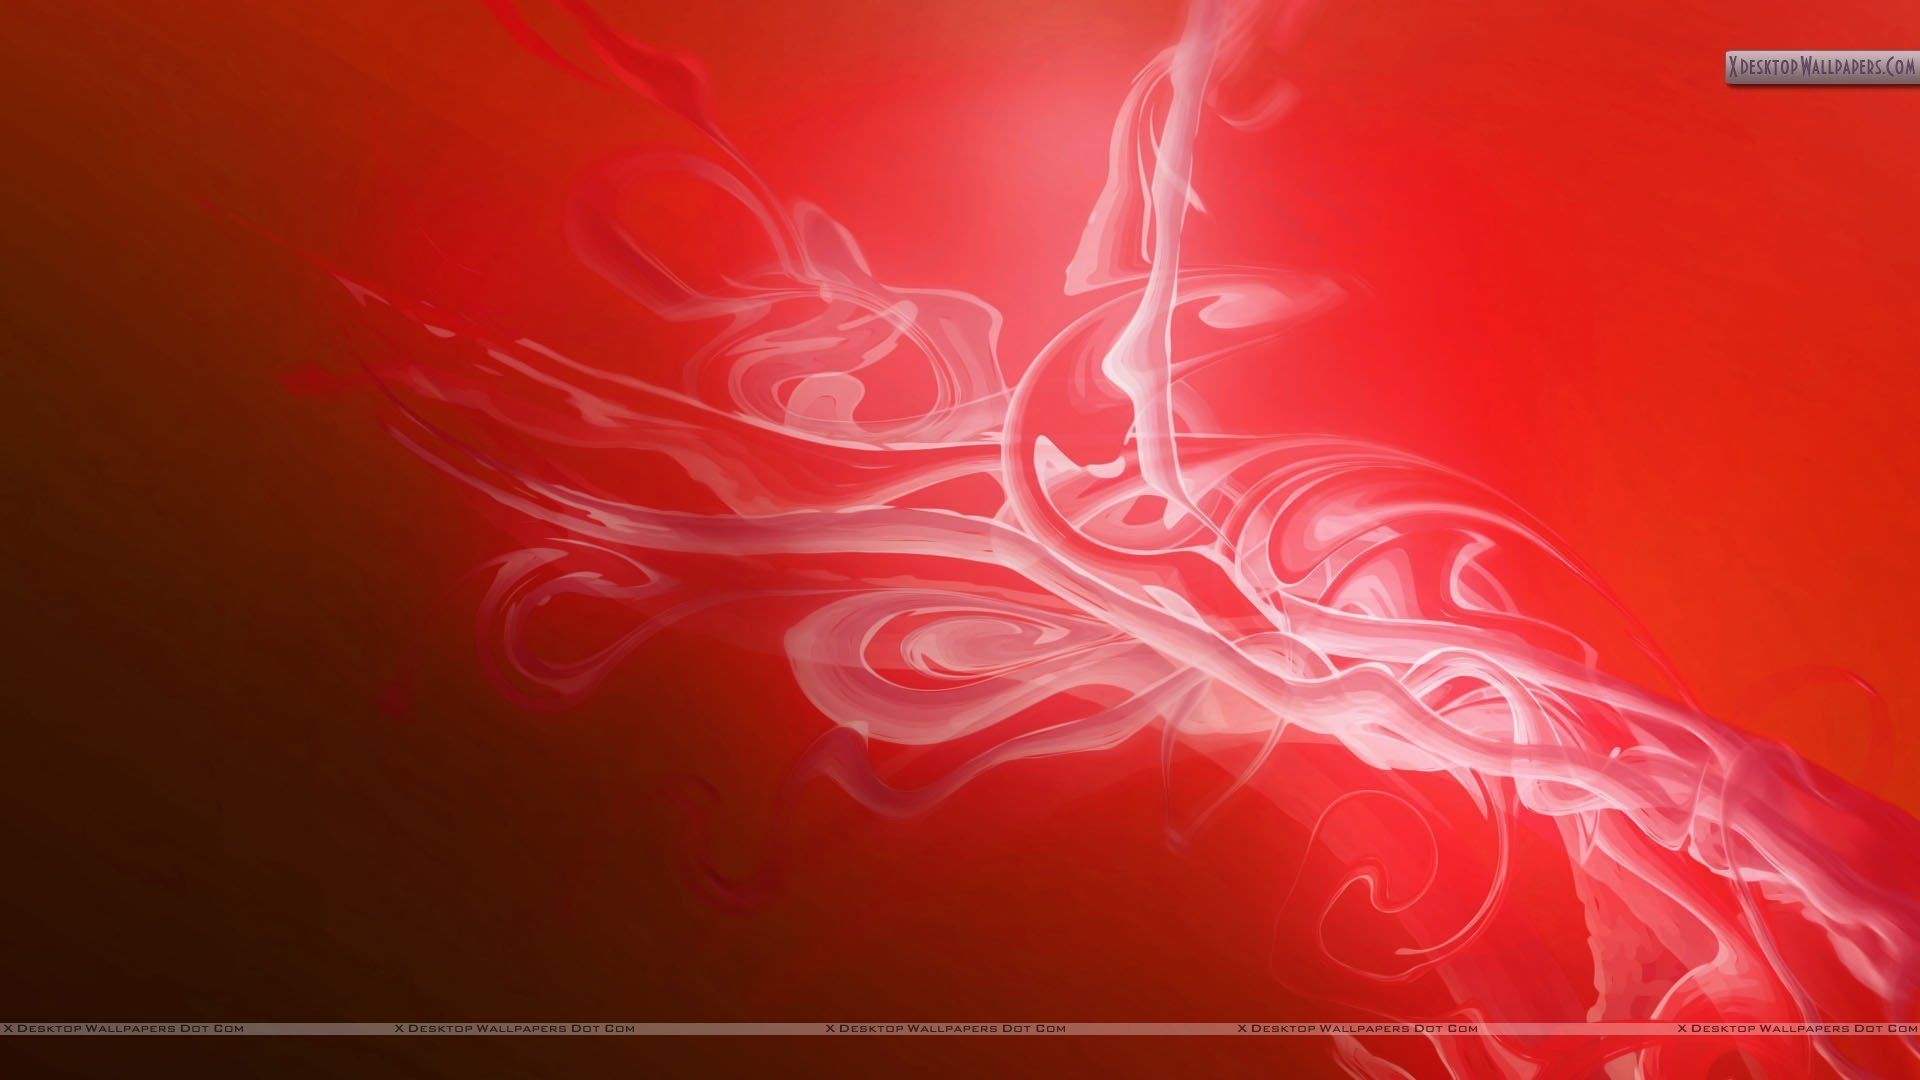 Background Red Download Free Stunning Wallpapers For Desktop